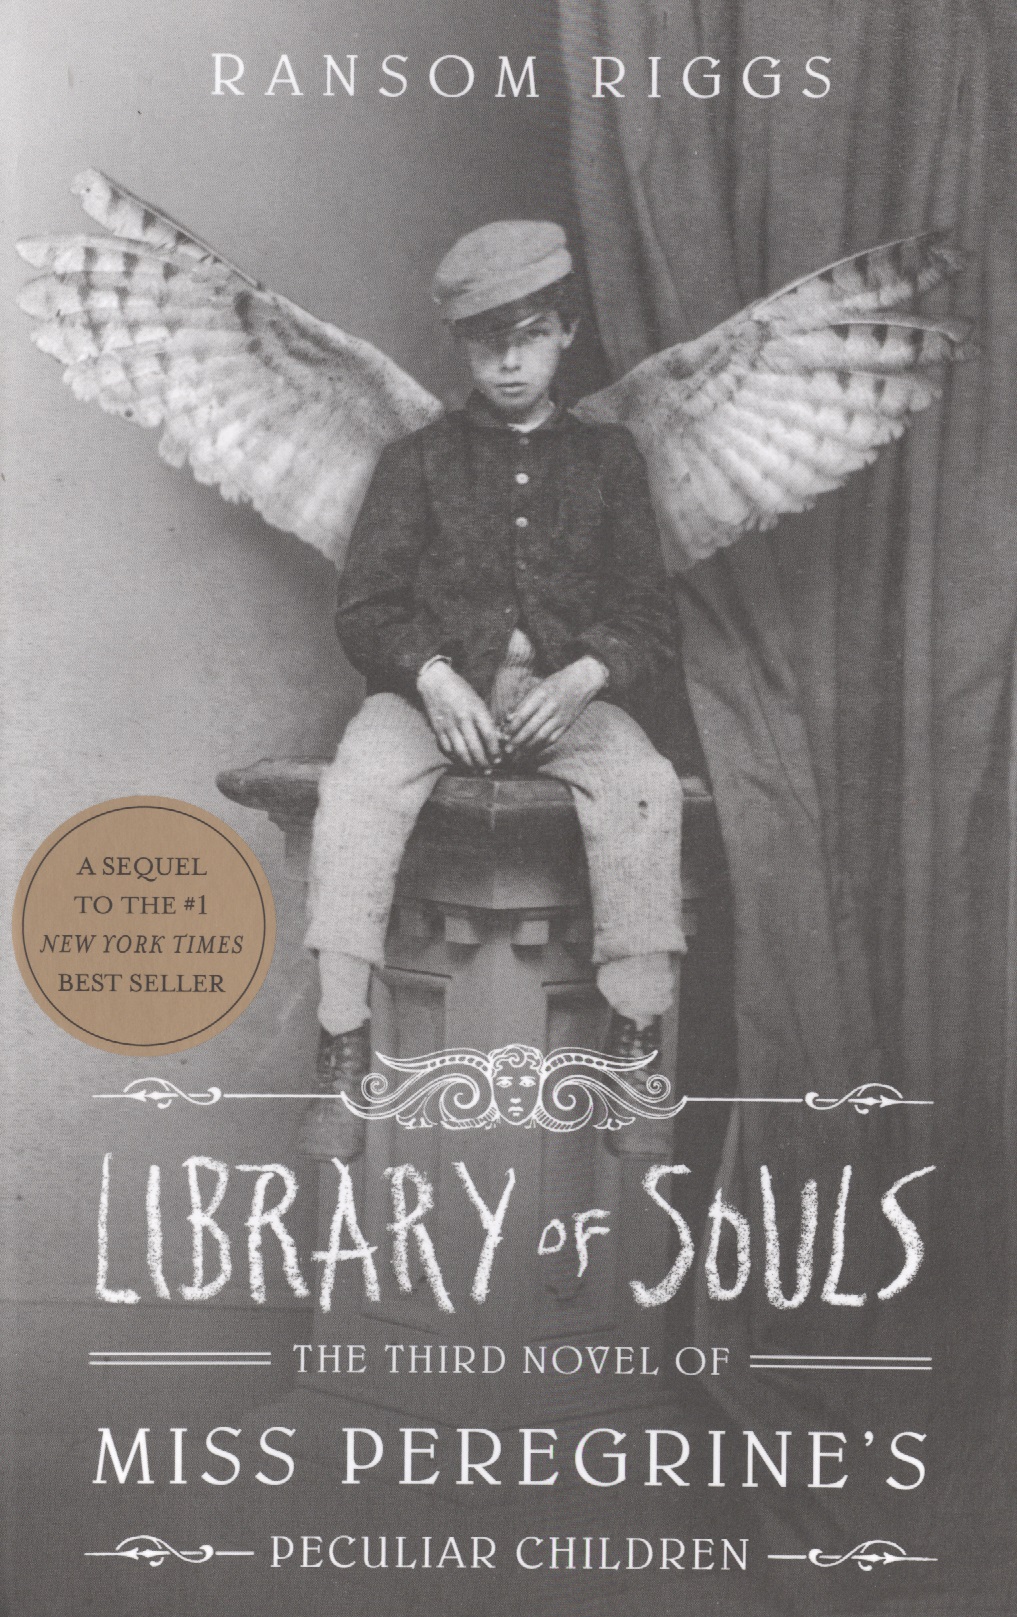 Riggs Ralph M. Library of Souls riggs ransom library of souls